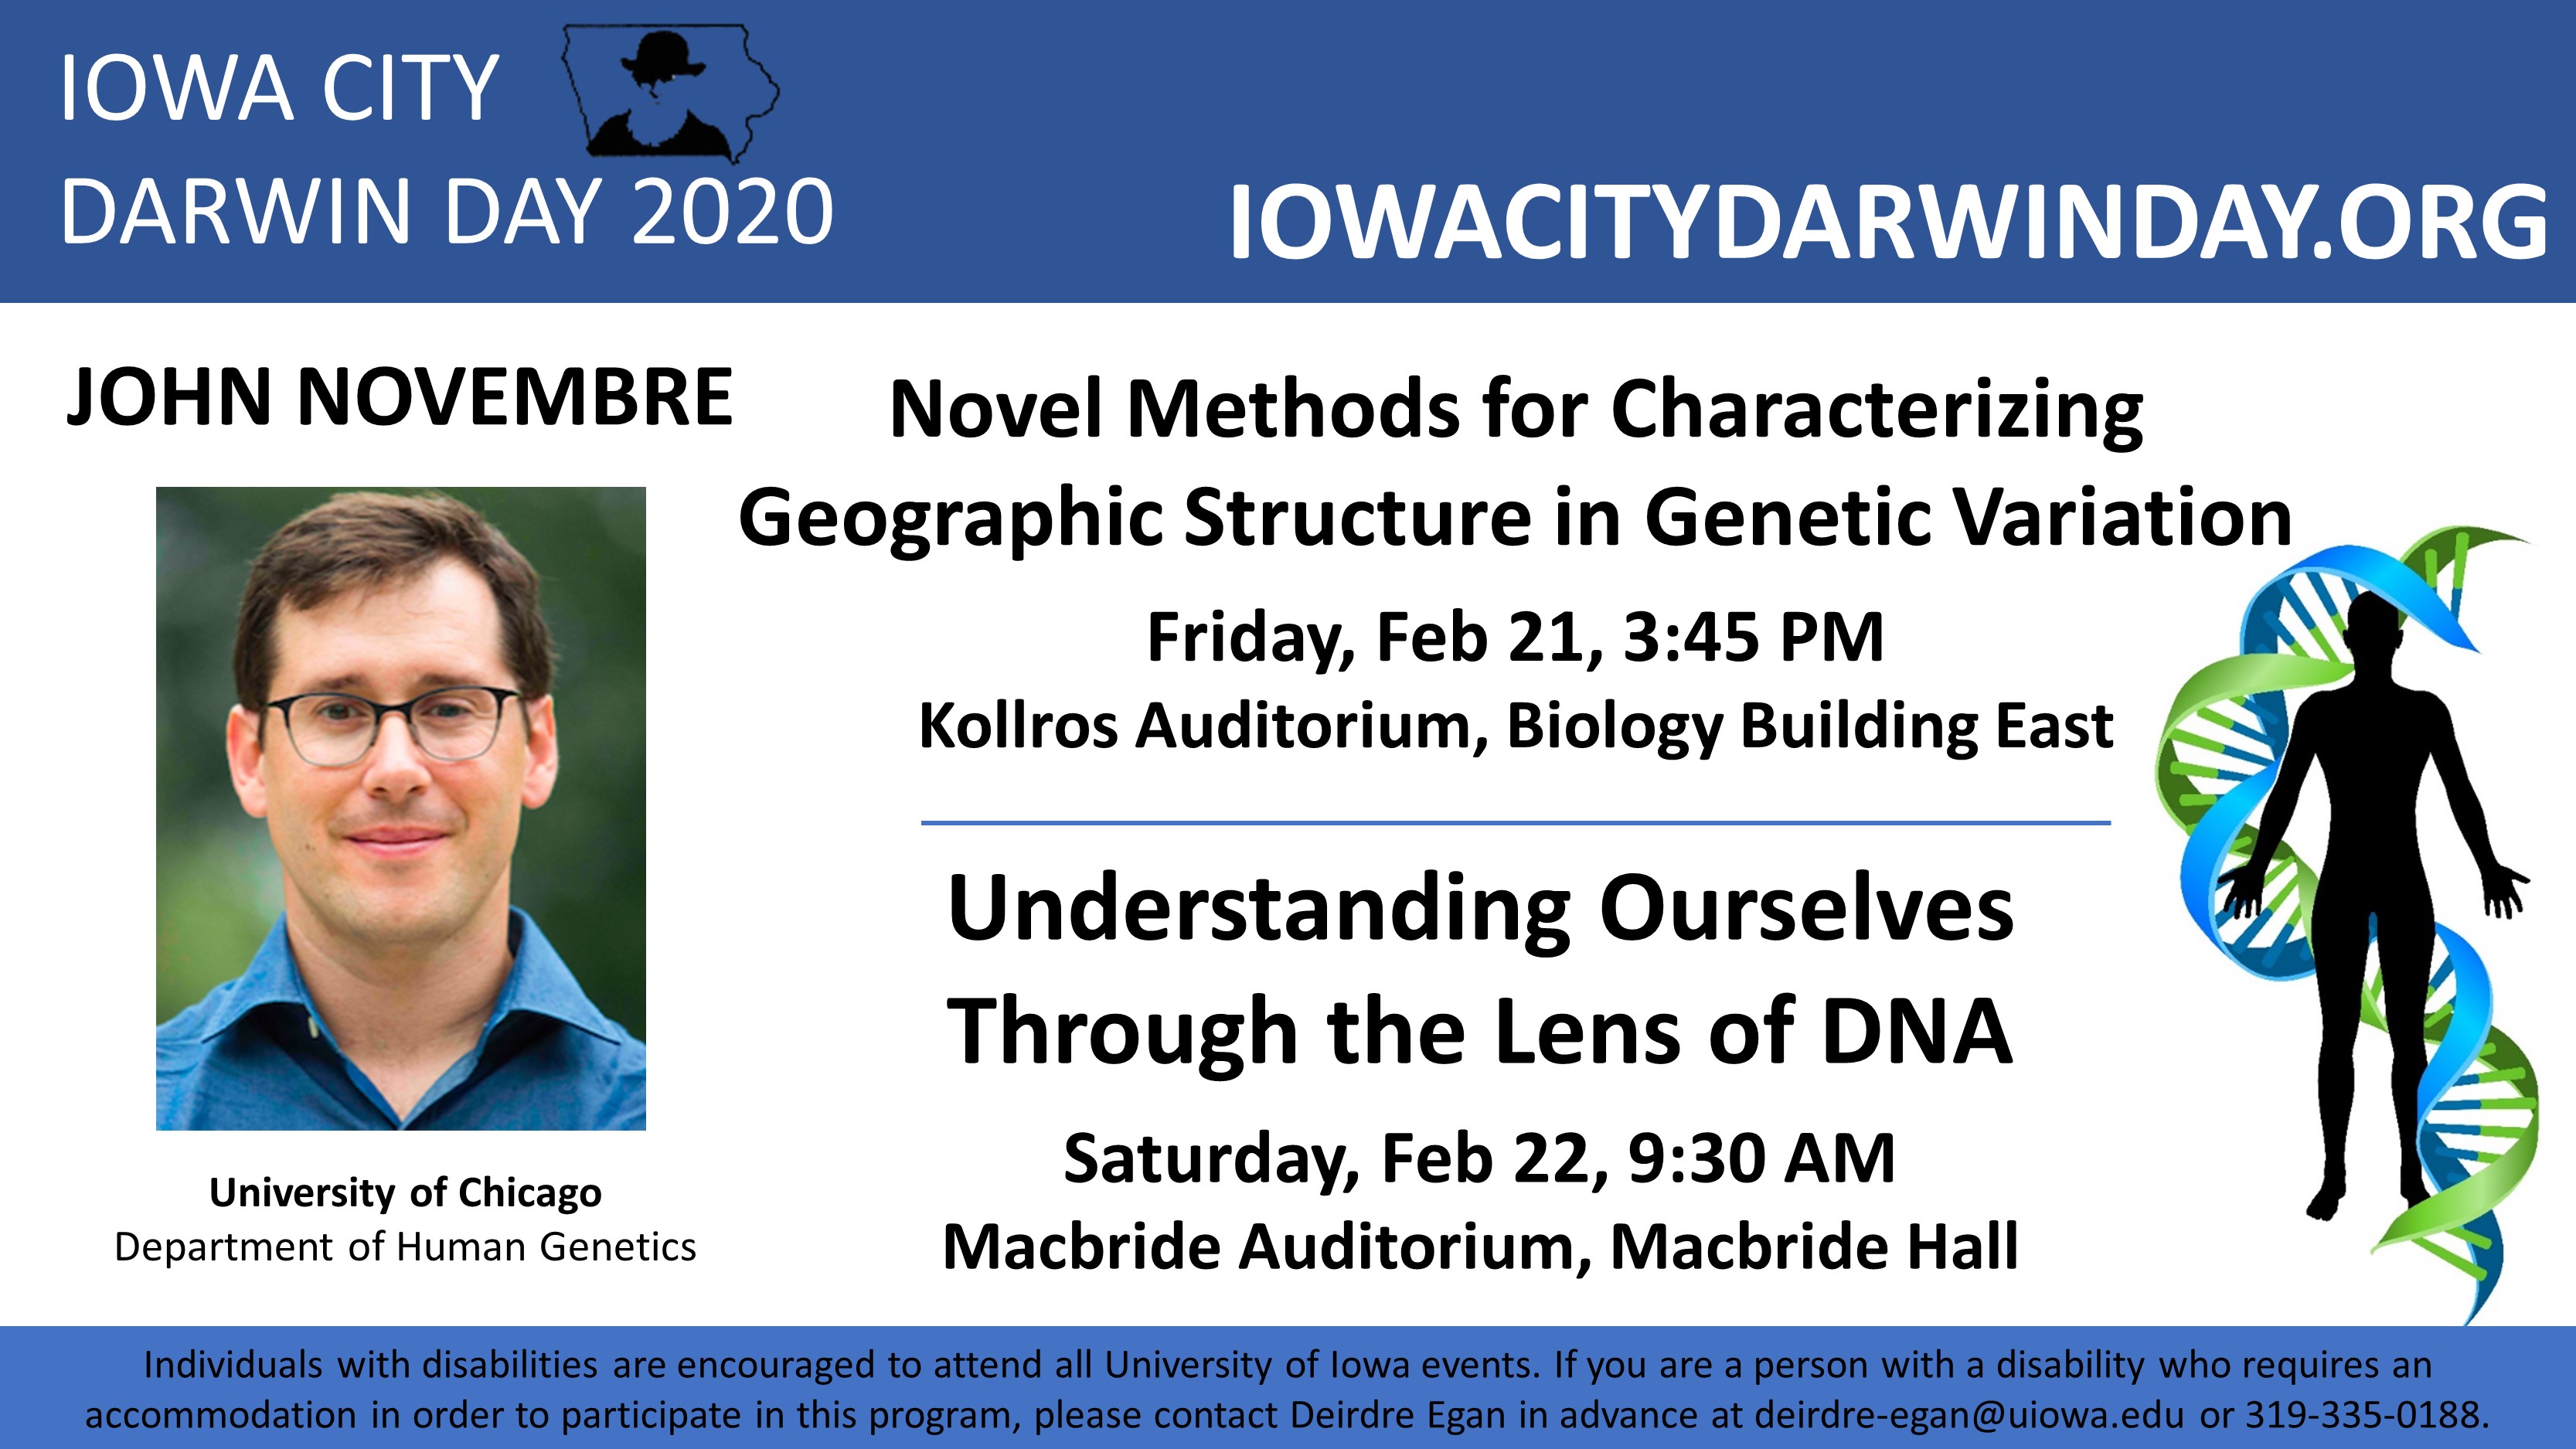 John Novembre - Novel Methods for Characterizing Geographic Structure in Genetic Variation promotional image